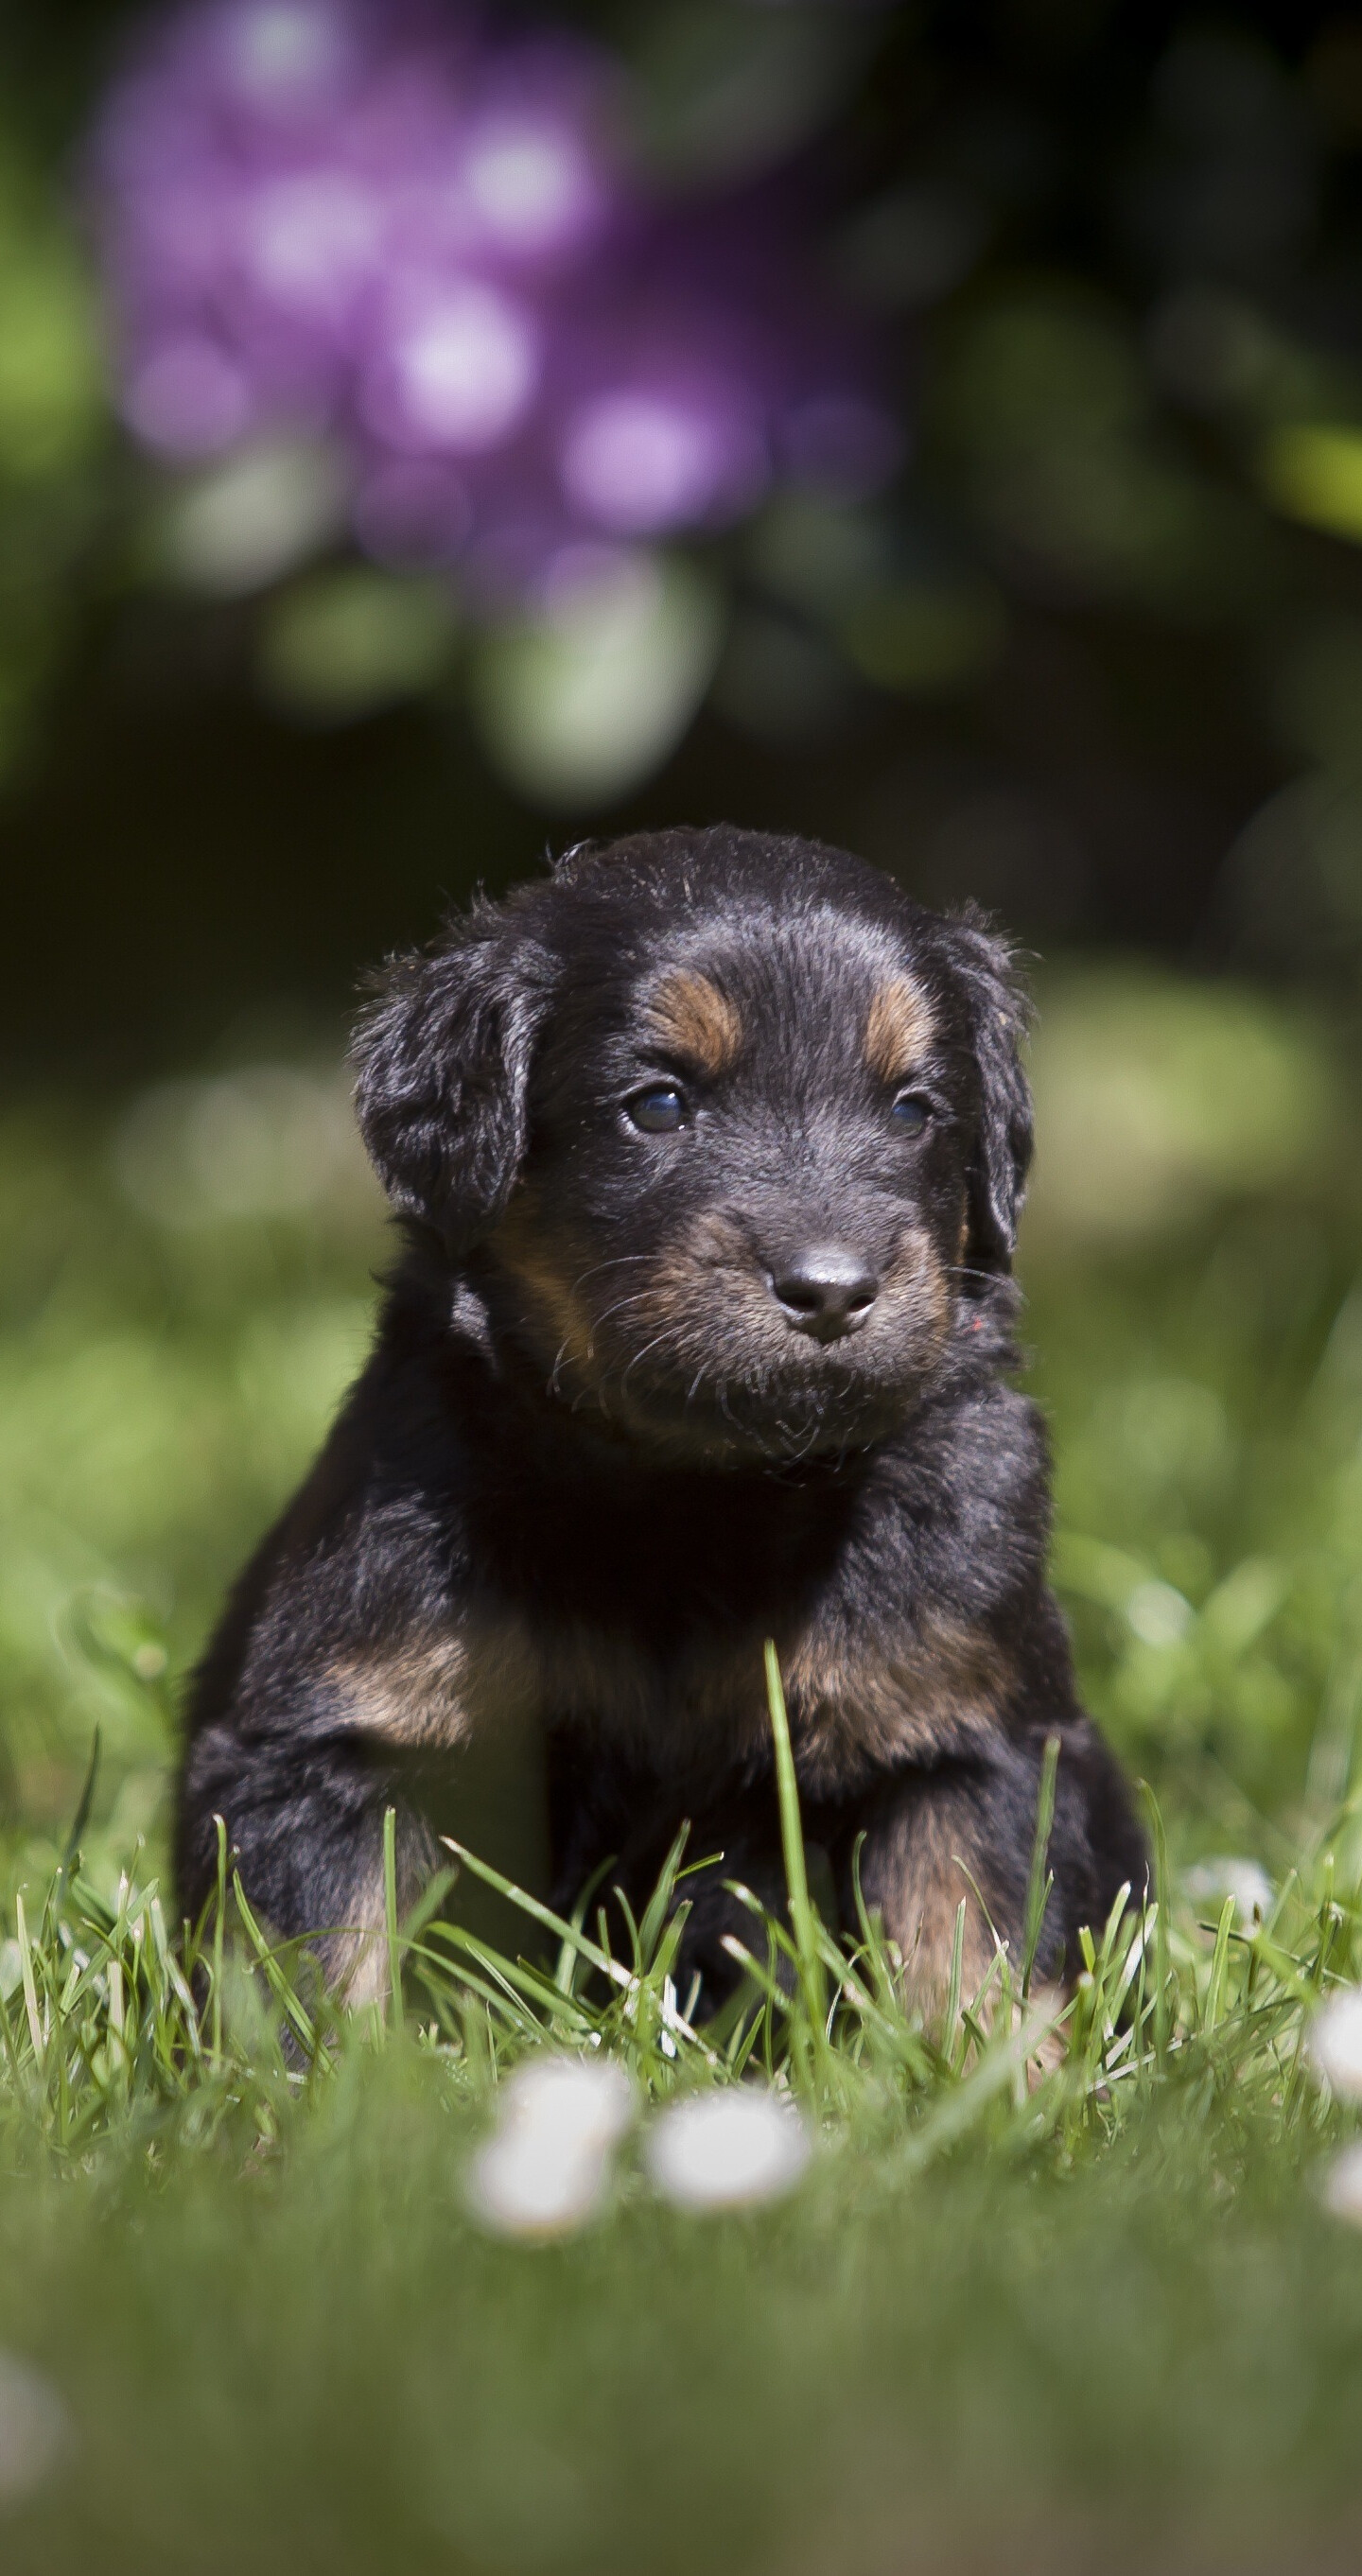 Puppy: Dog, Most popular domestic animals in the world. 1440x2730 HD Wallpaper.